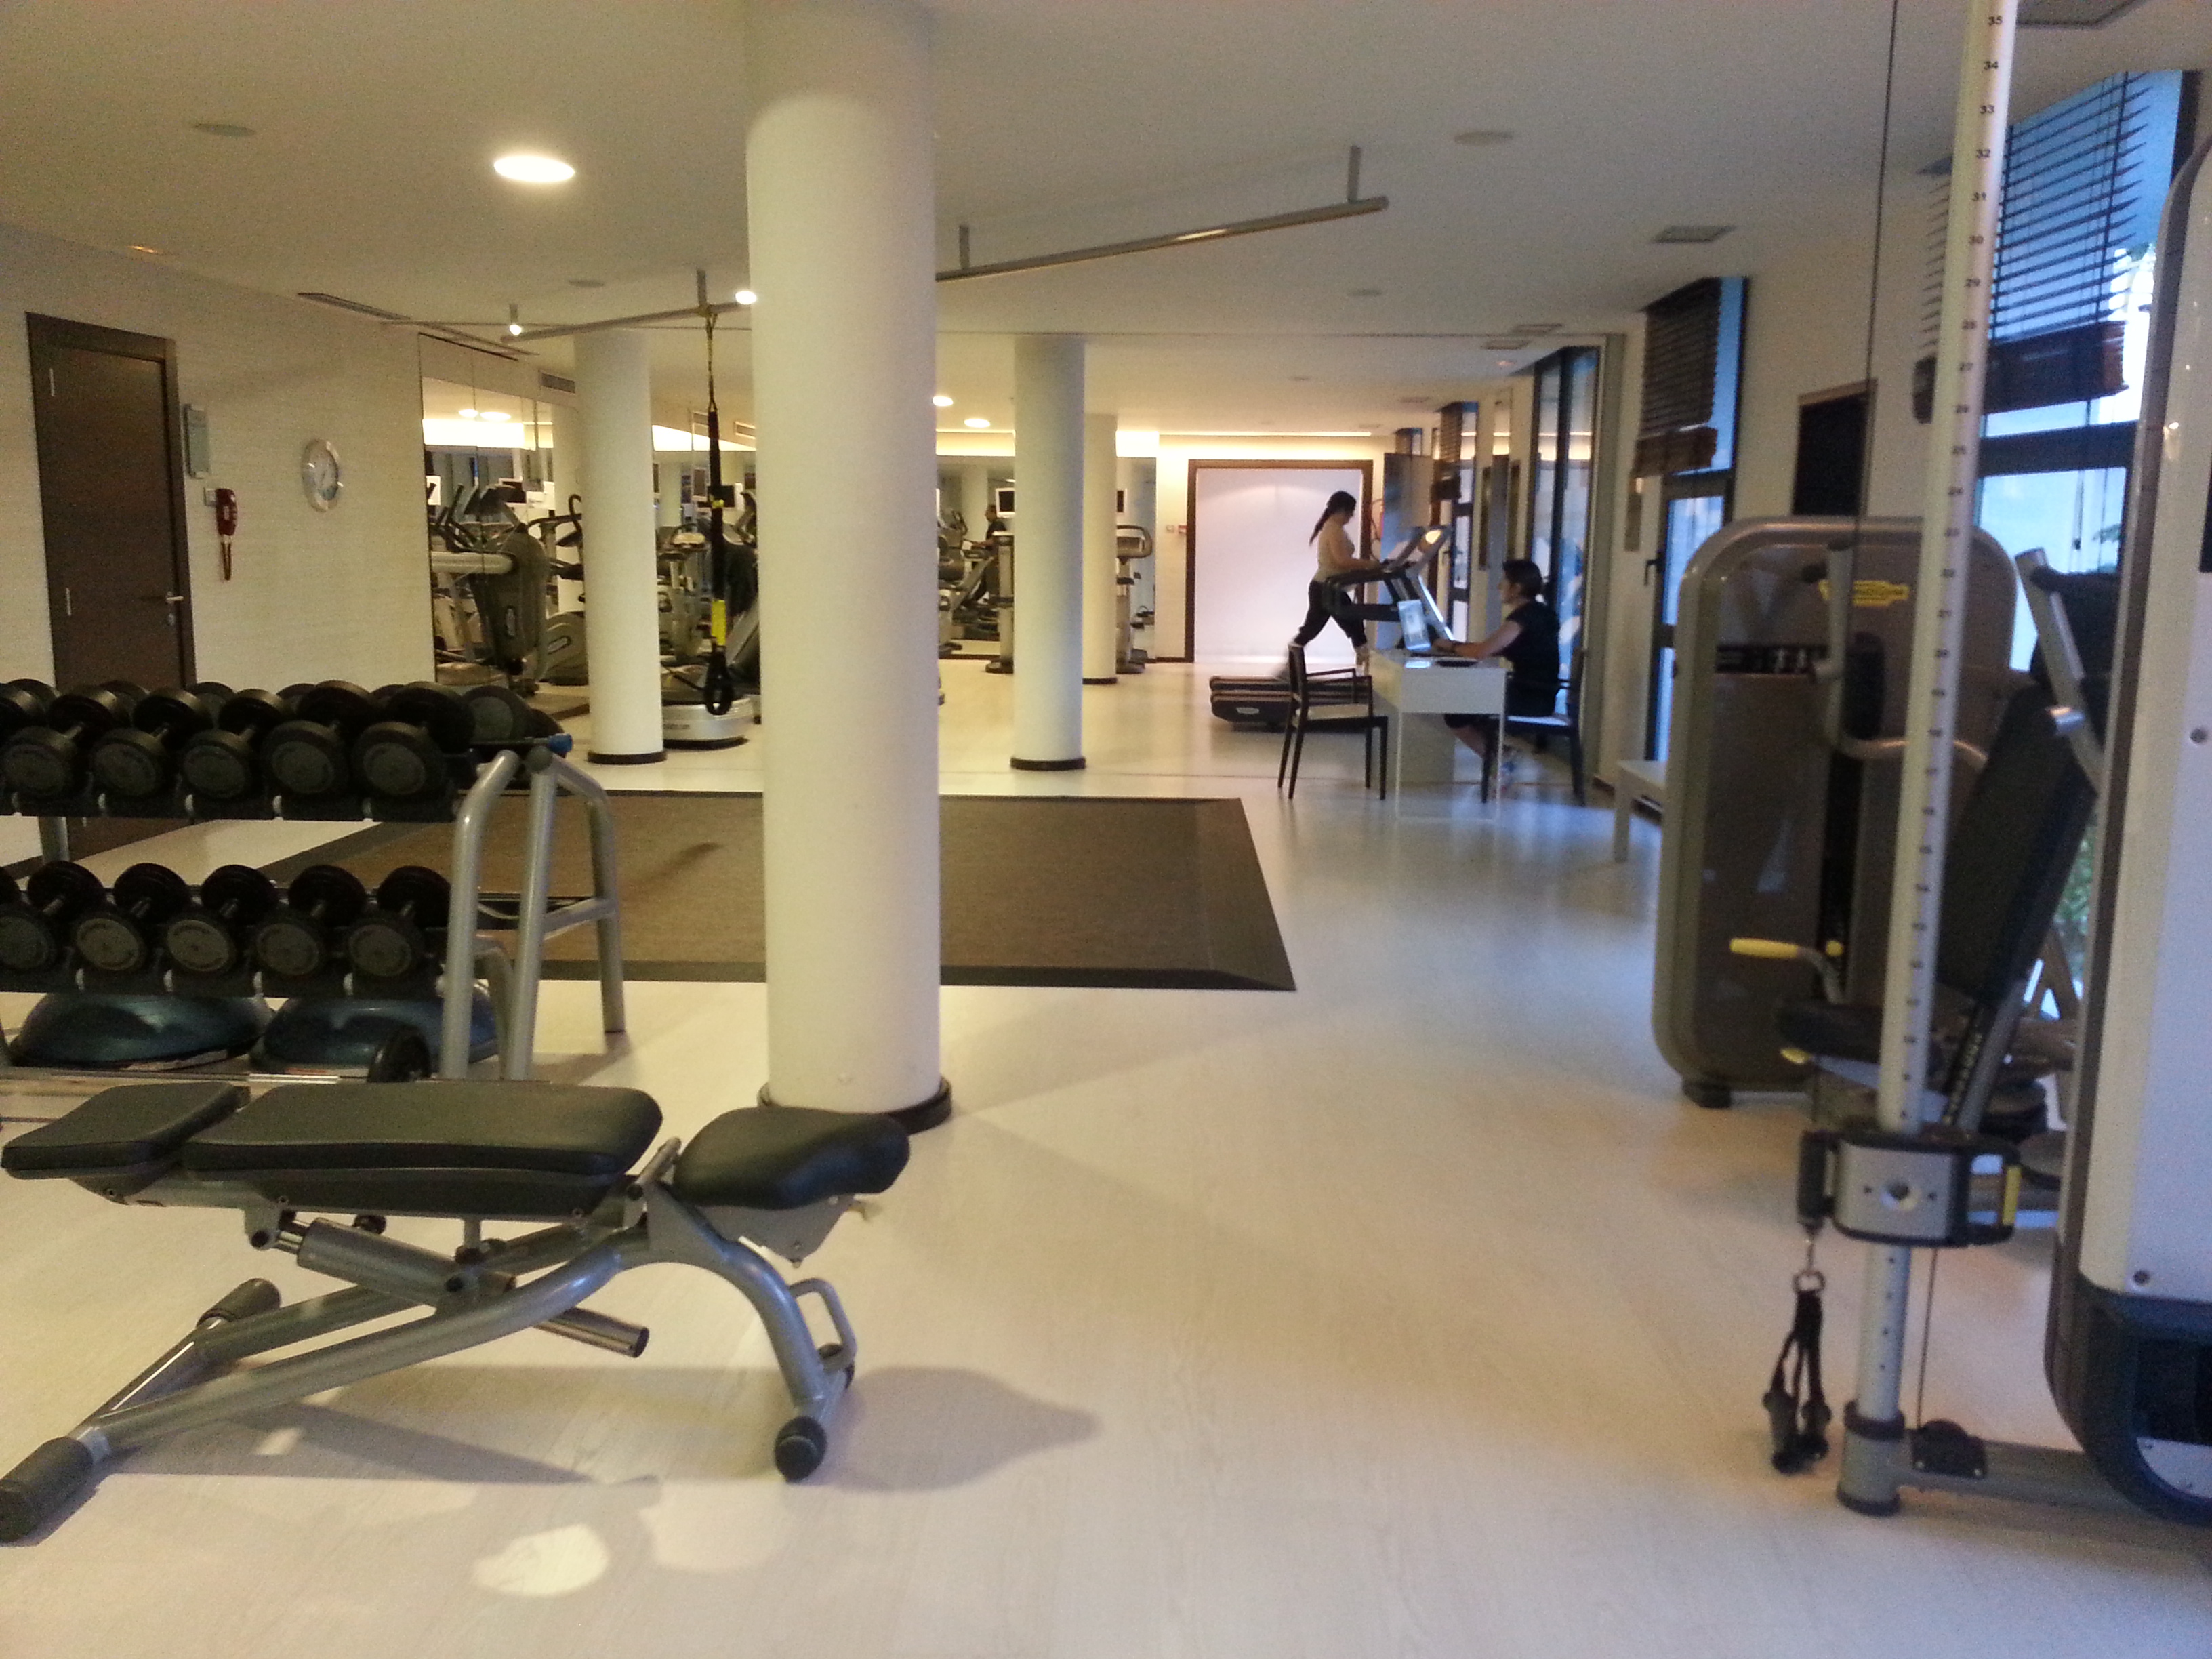 SHA Wellness Clinic's state of the art gym facilities